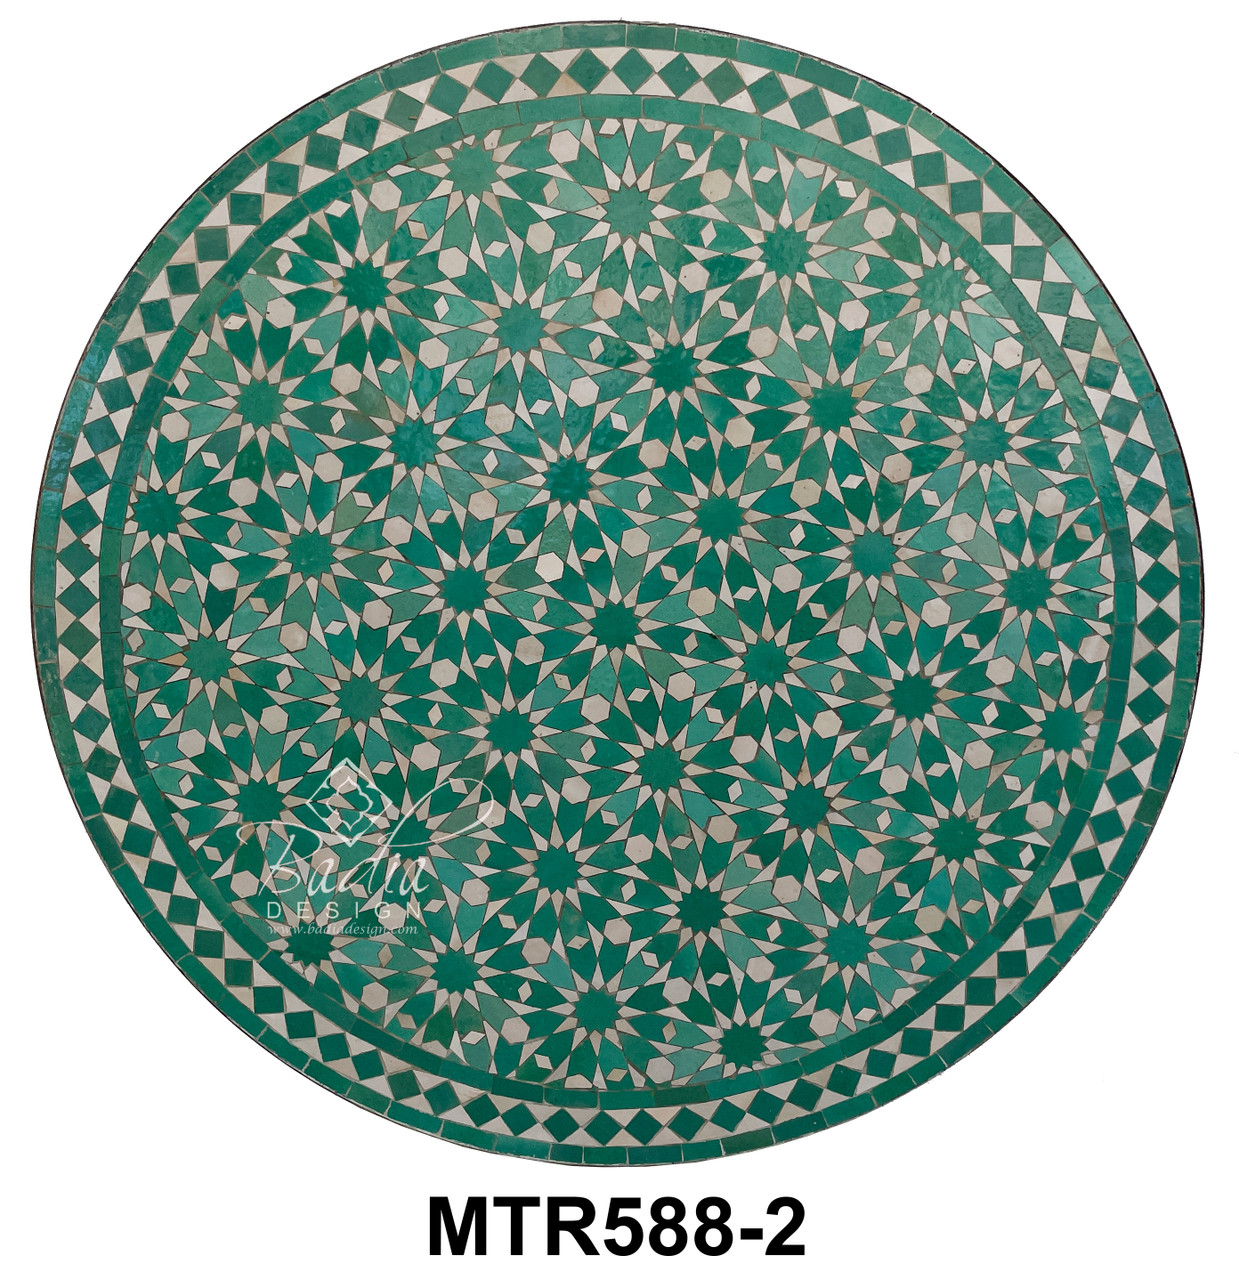 39 Inch Round Moroccan Mosaic Tile Table Top - MTR588